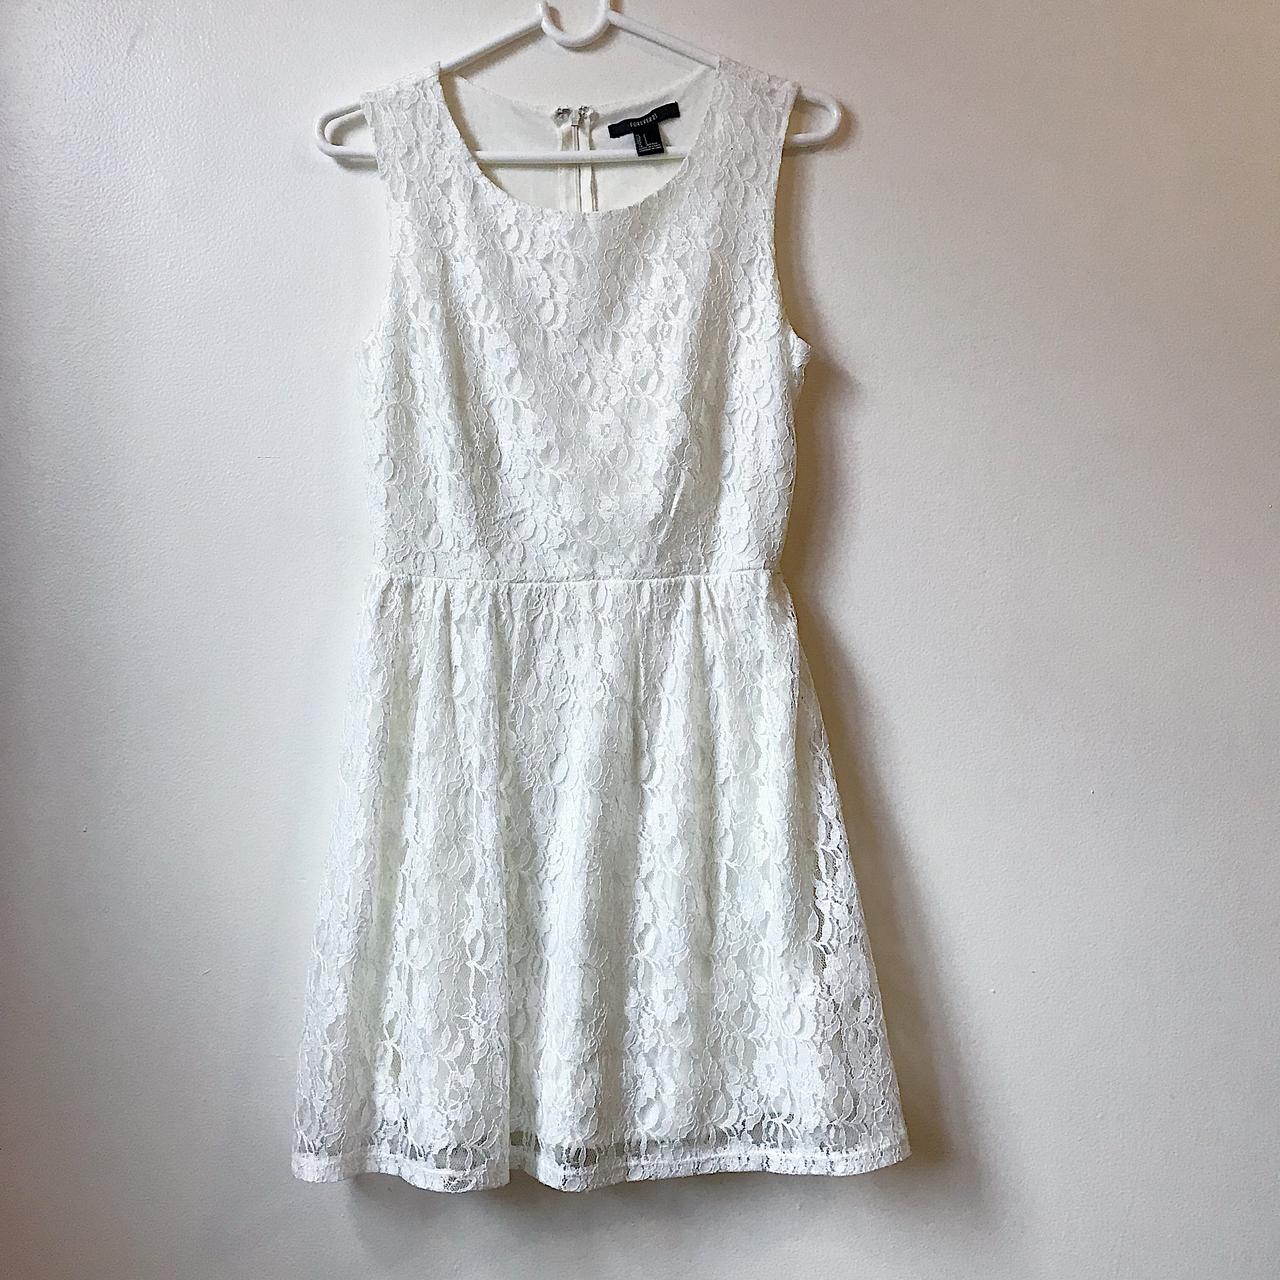 Forever 21 White Lace Dress Super cute ...